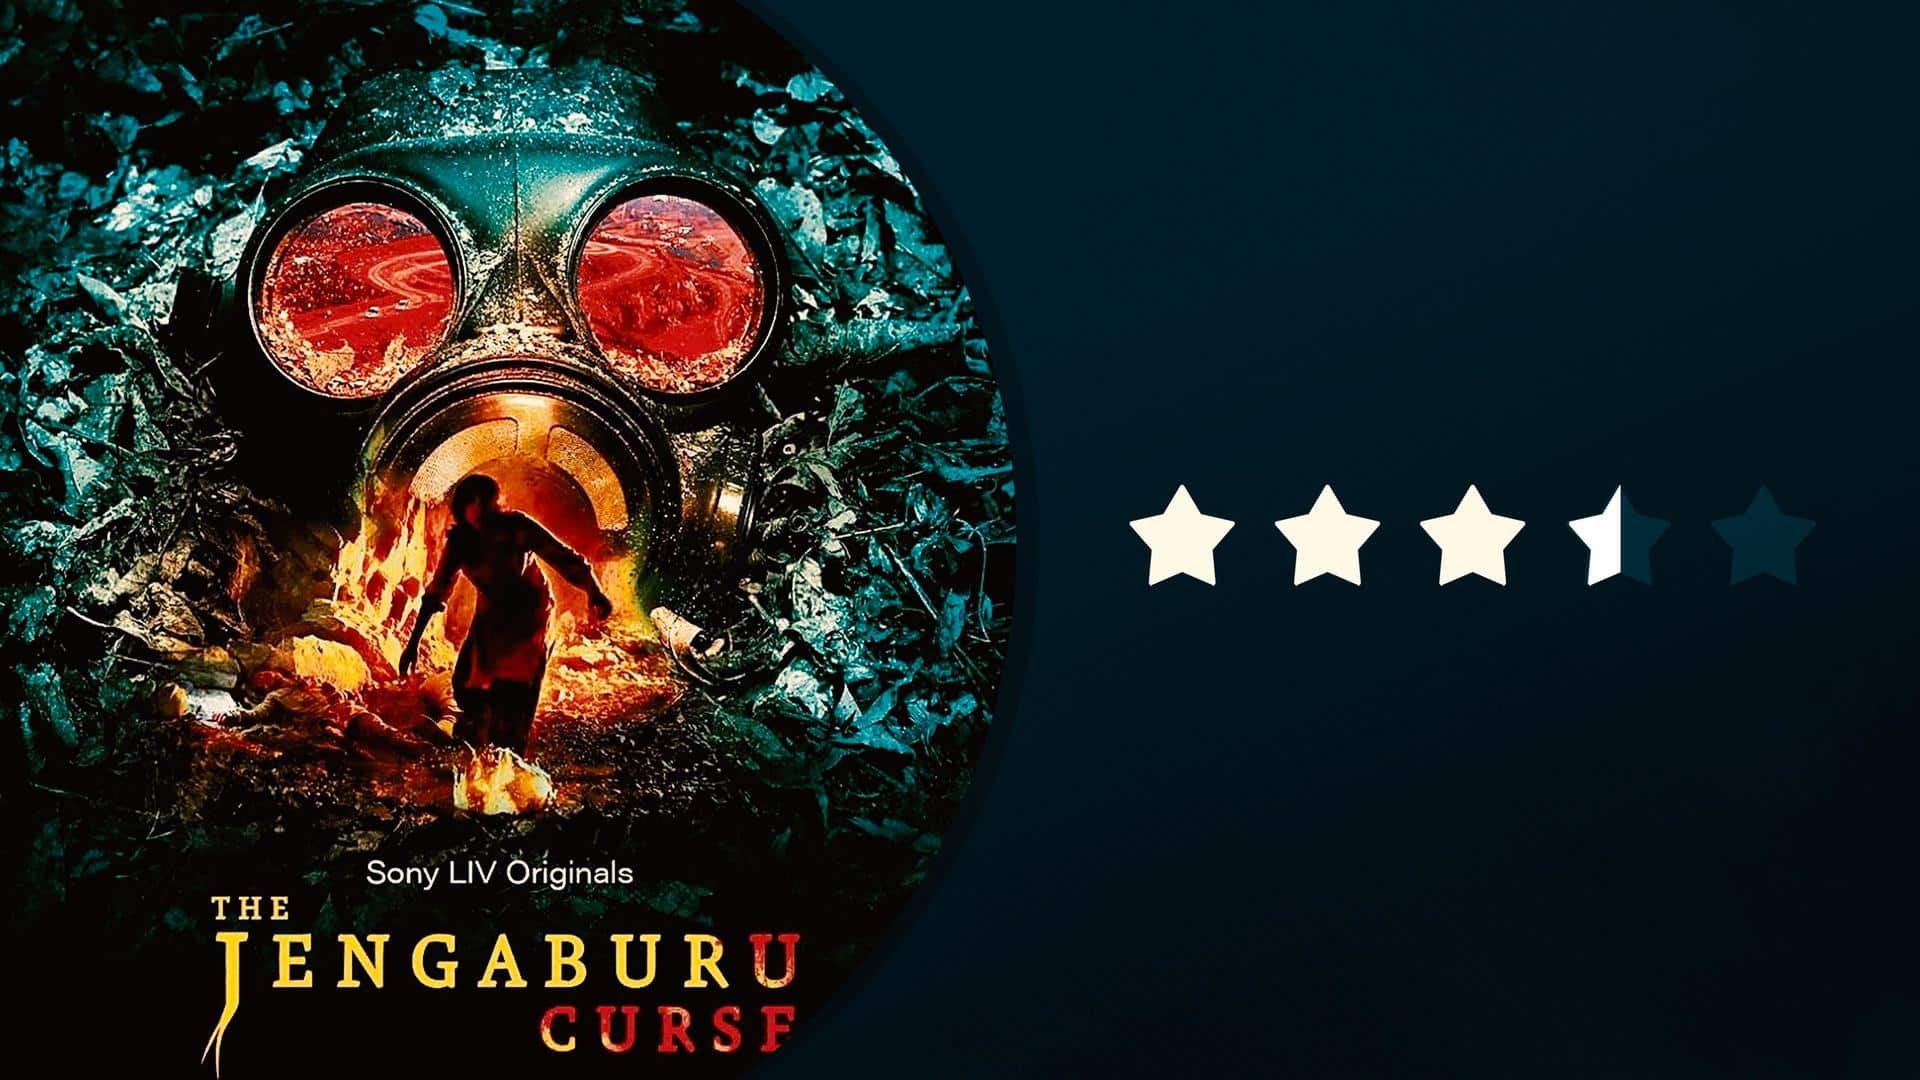 #TheJengaburuCurse review: It's greed versus survival in this intriguing tale